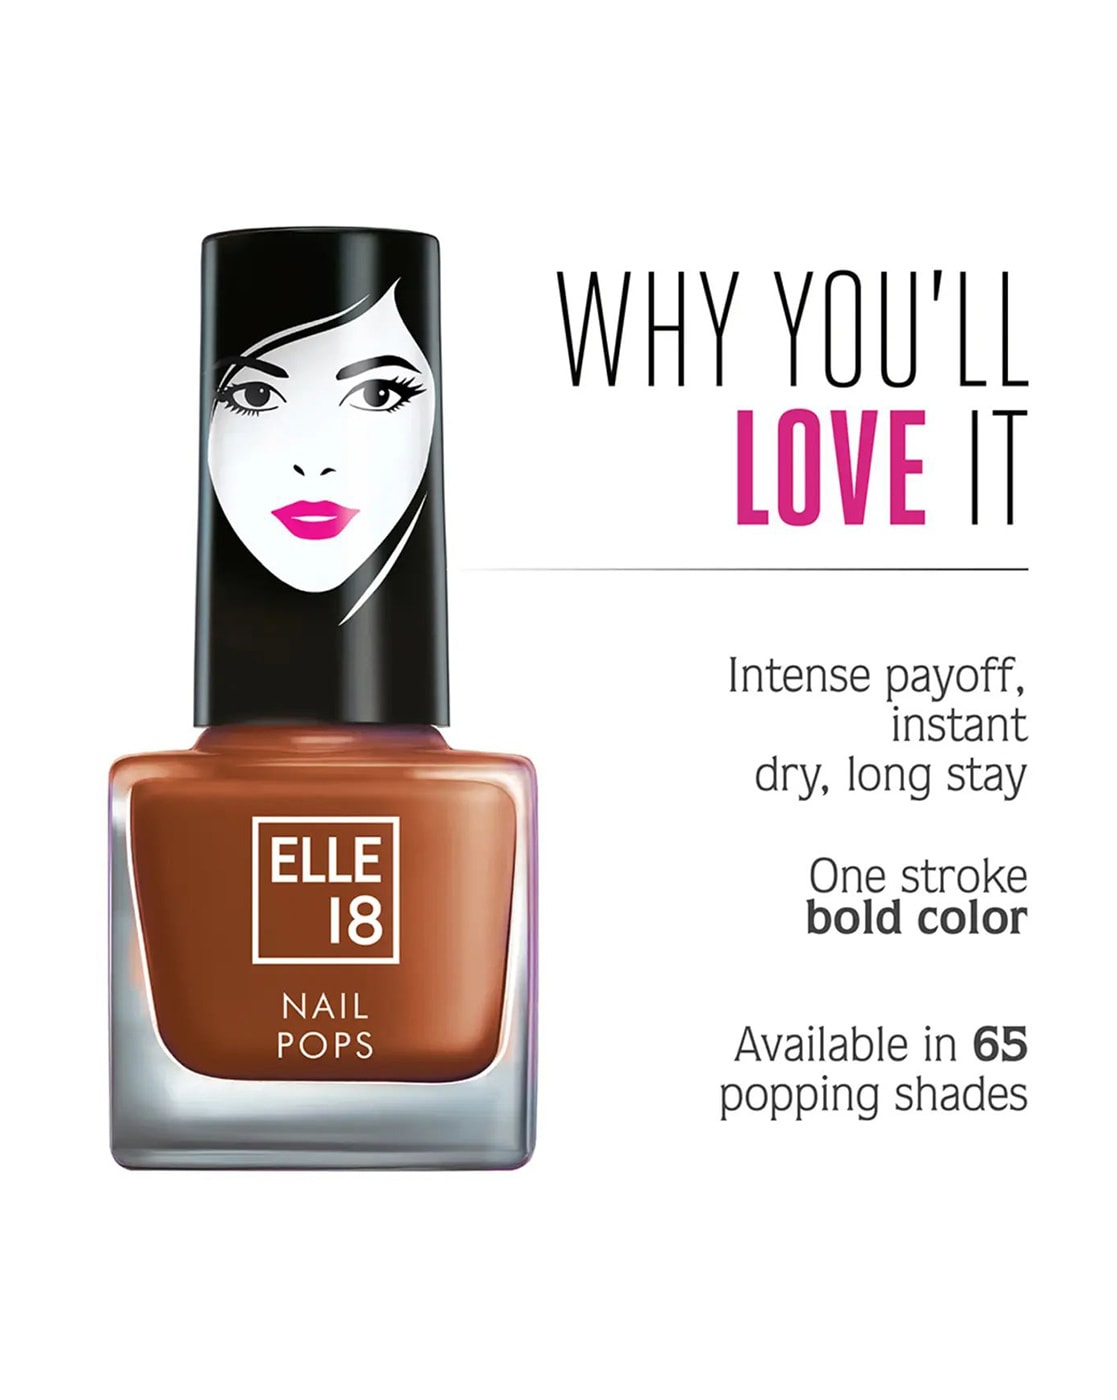 Buy Elle 18 Nail Pops - Nail Colour, Glossy Finish Online at Best Price of  Rs 55 - bigbasket